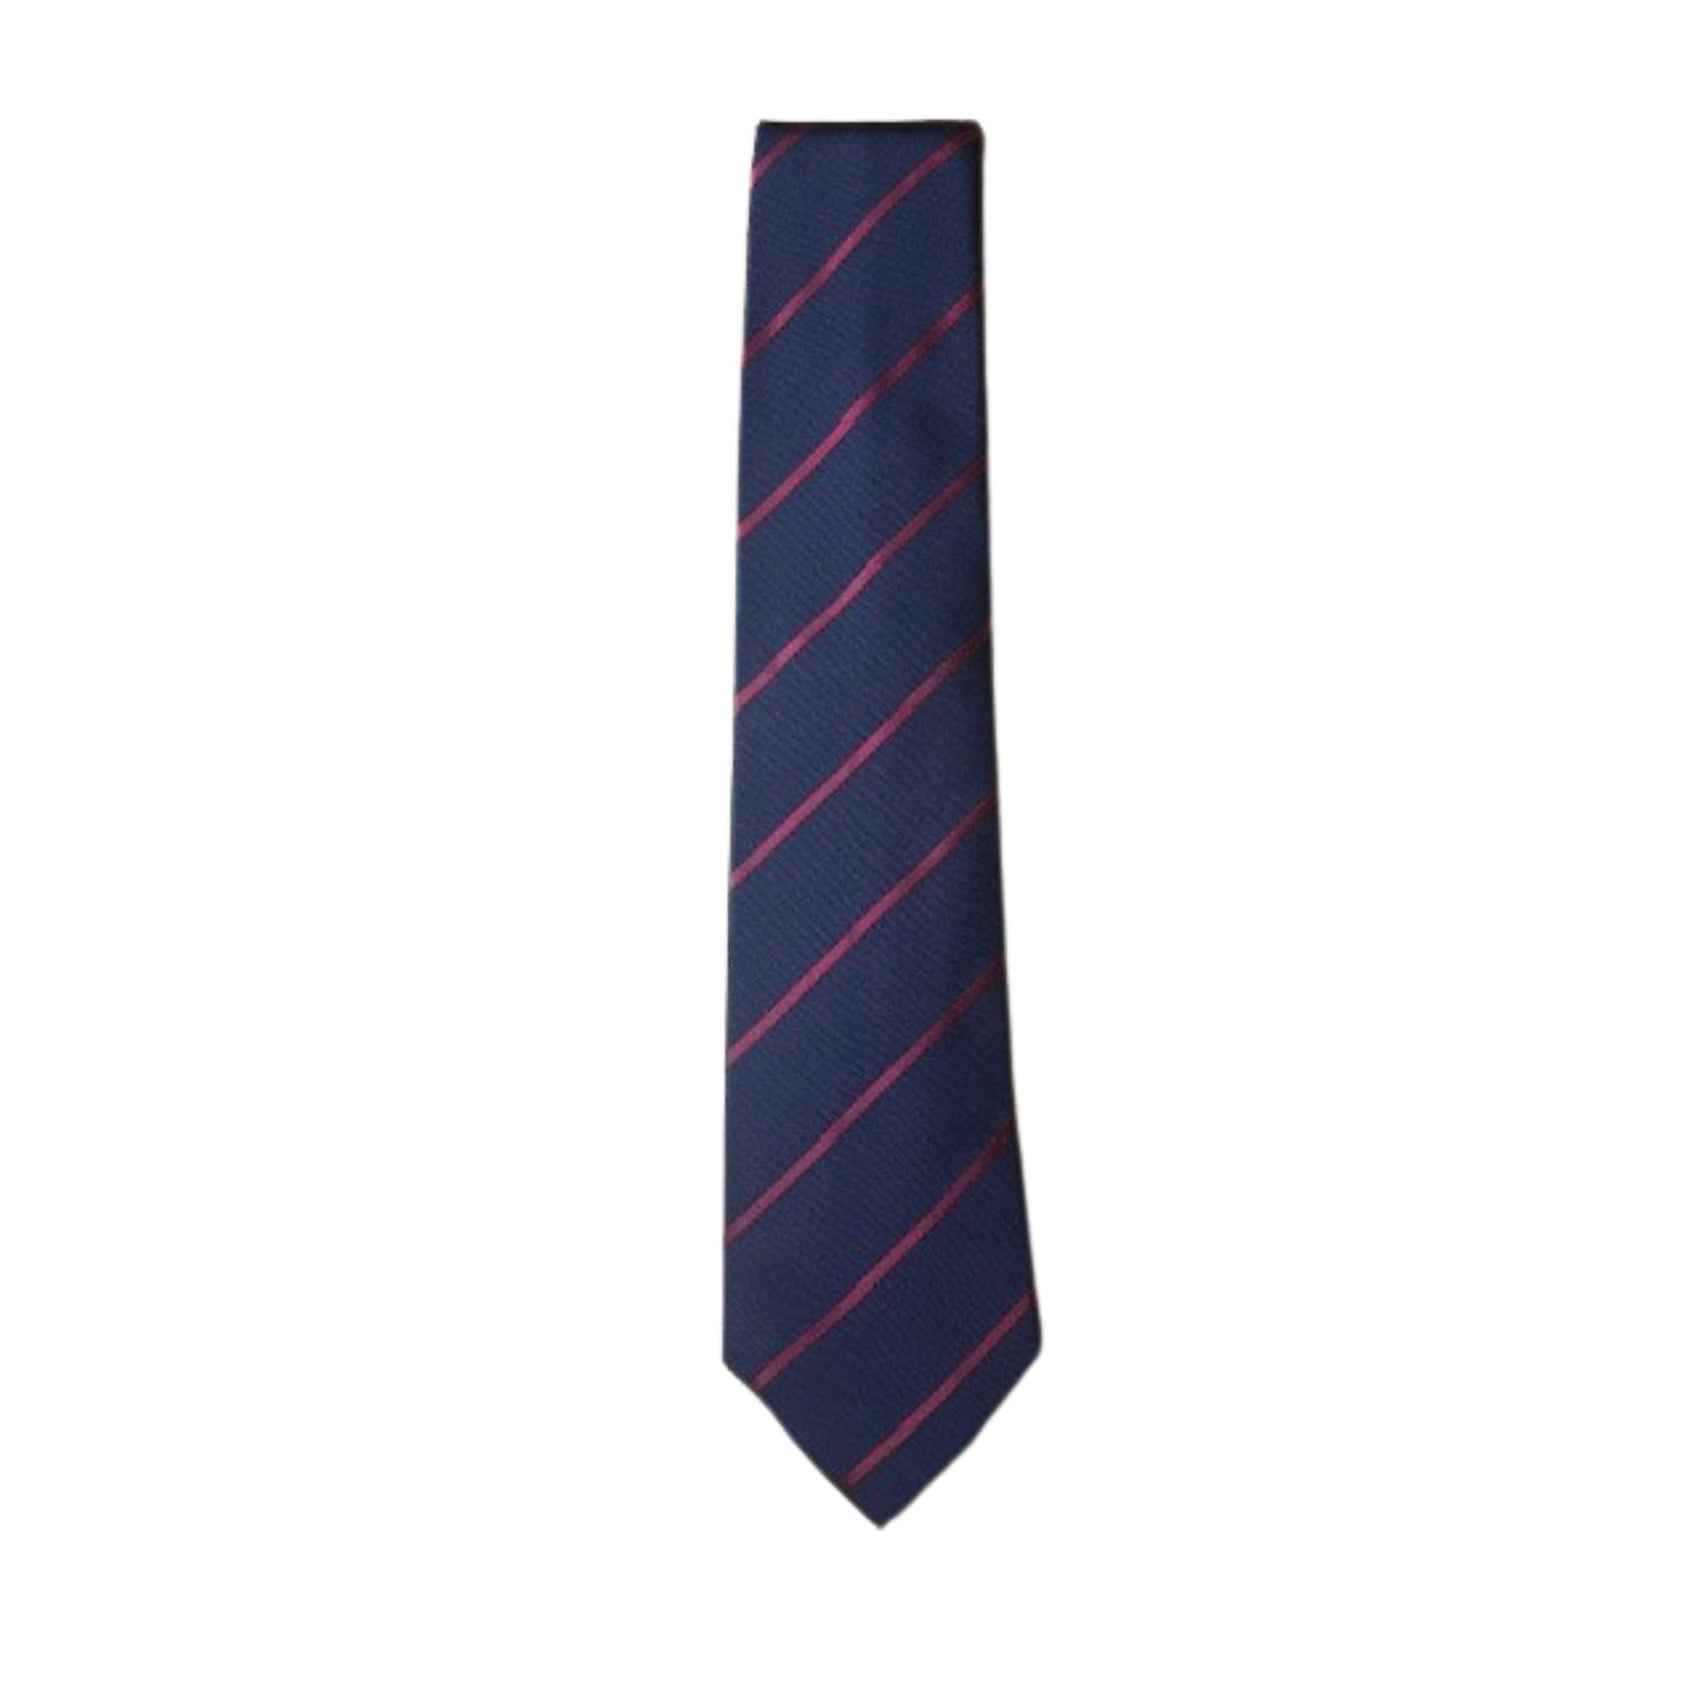 Navy and light Red stripe tie